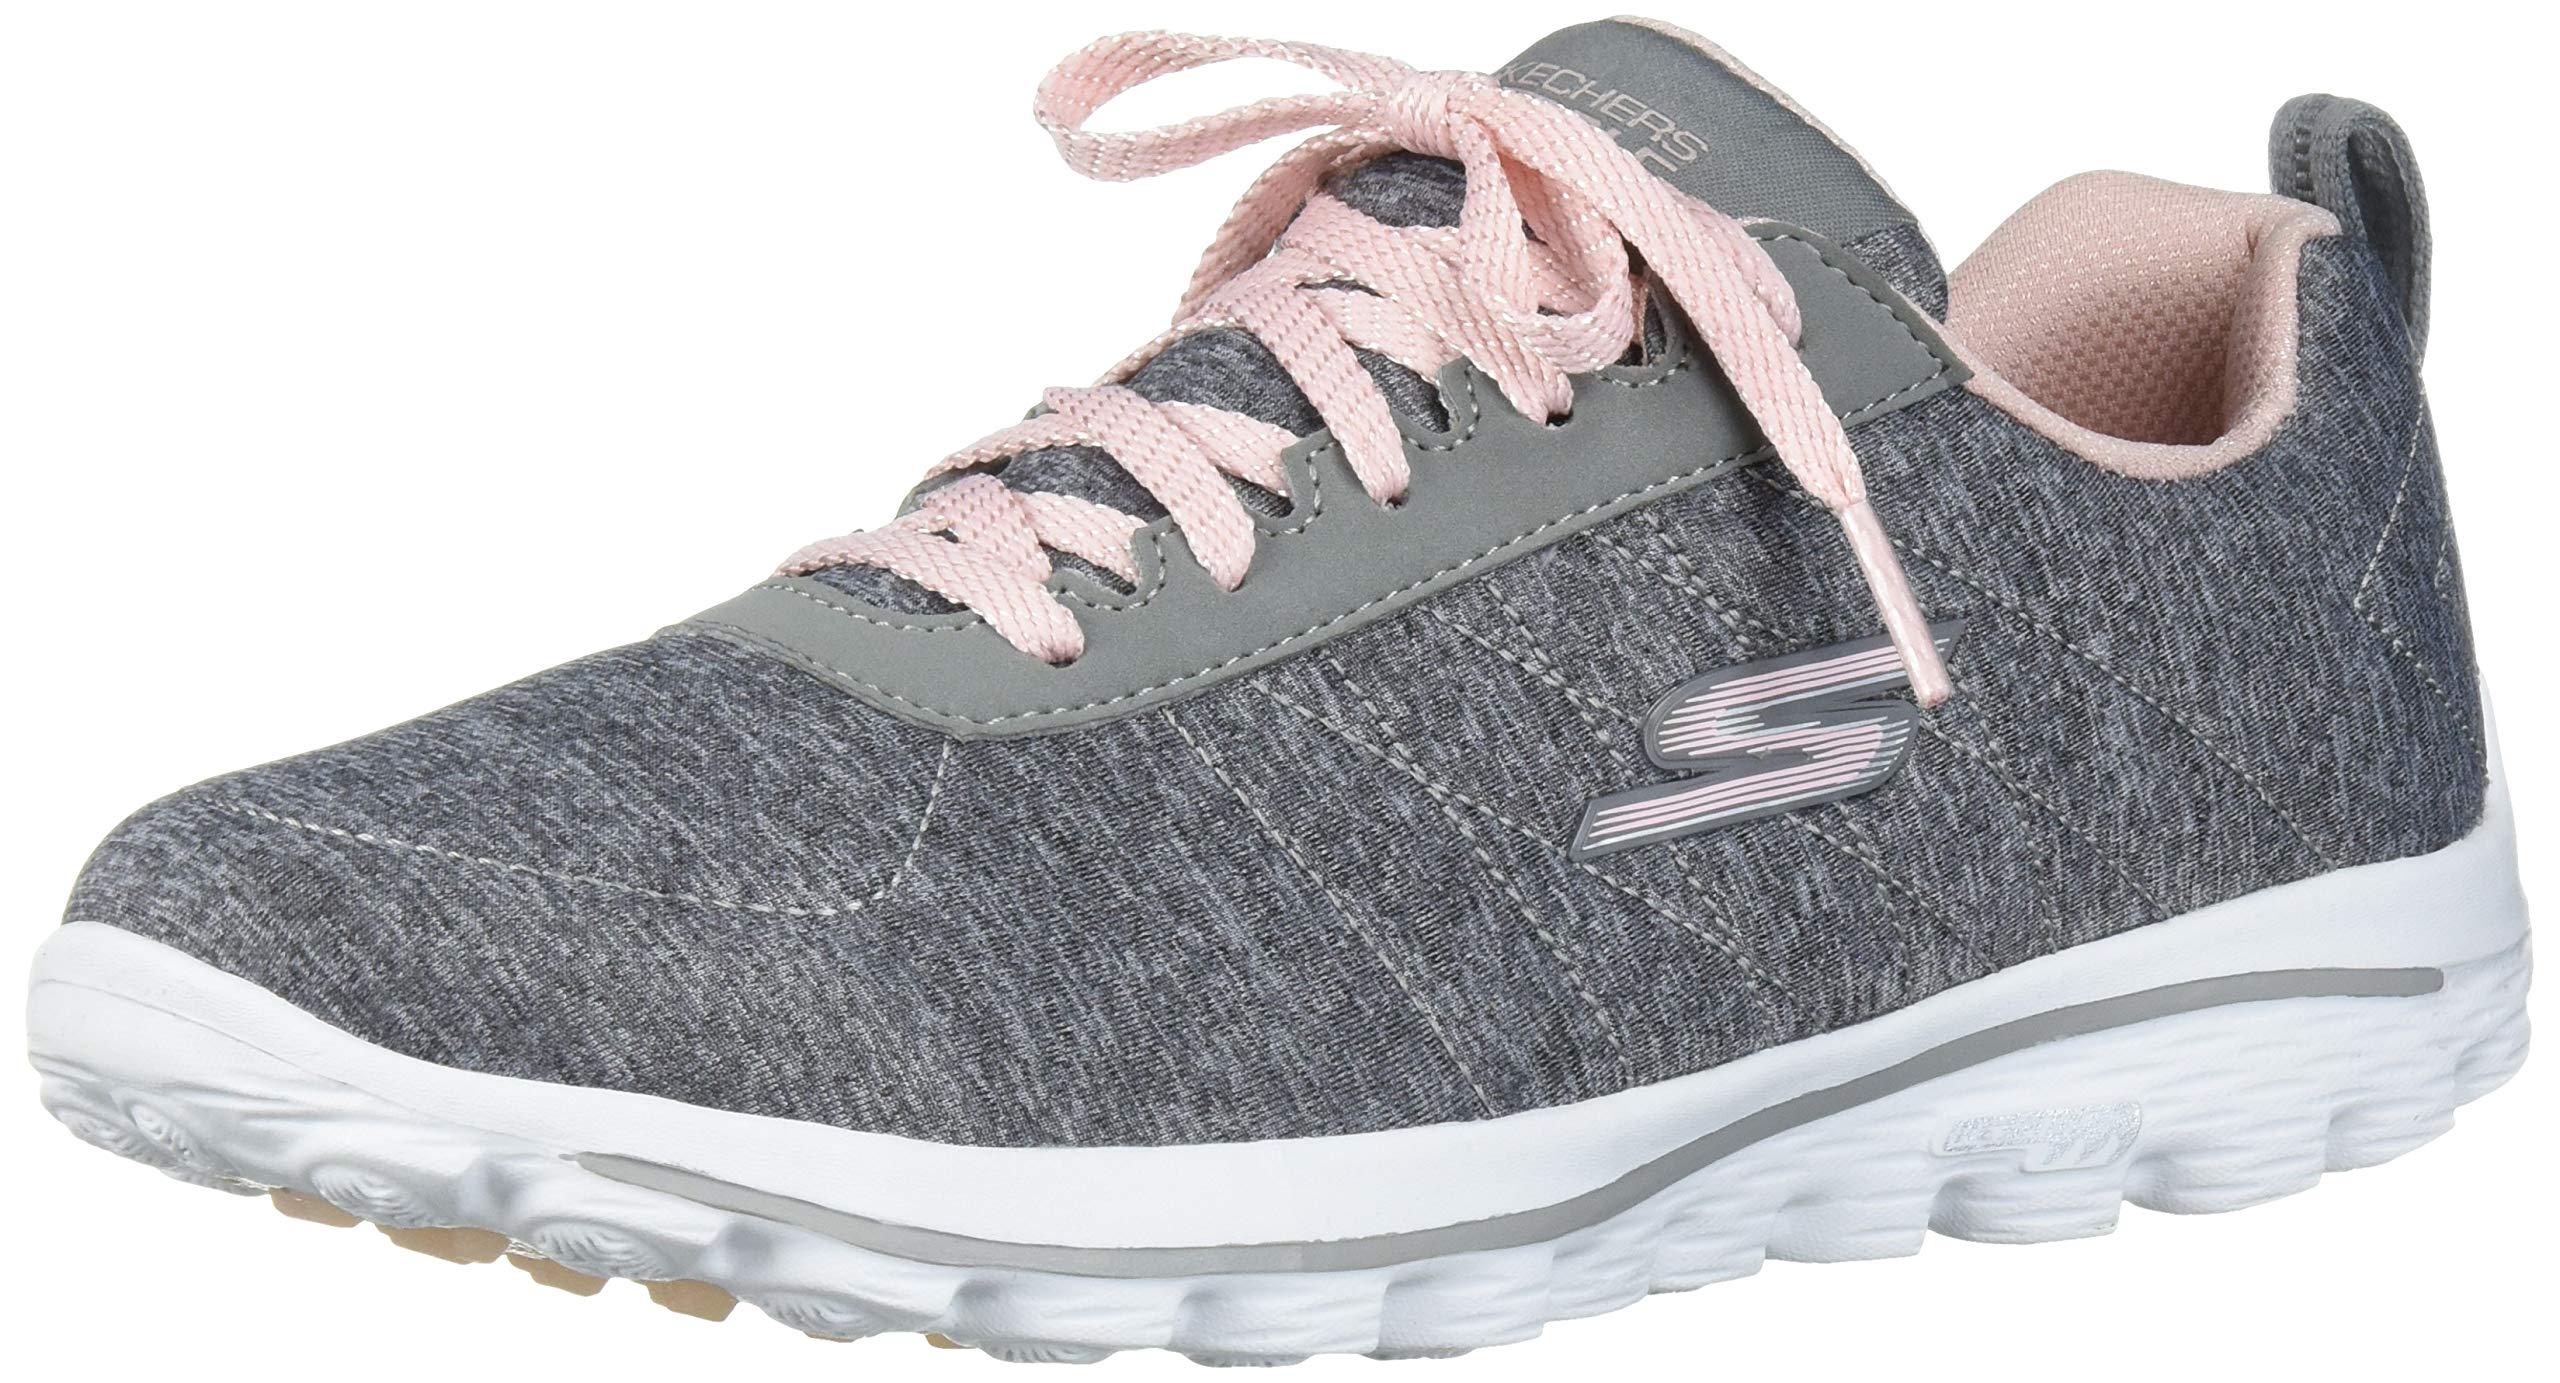 Skechers Go Walk Sport Relaxed Fit Golf Shoe in Gray/Pink (Gray) - Save ...